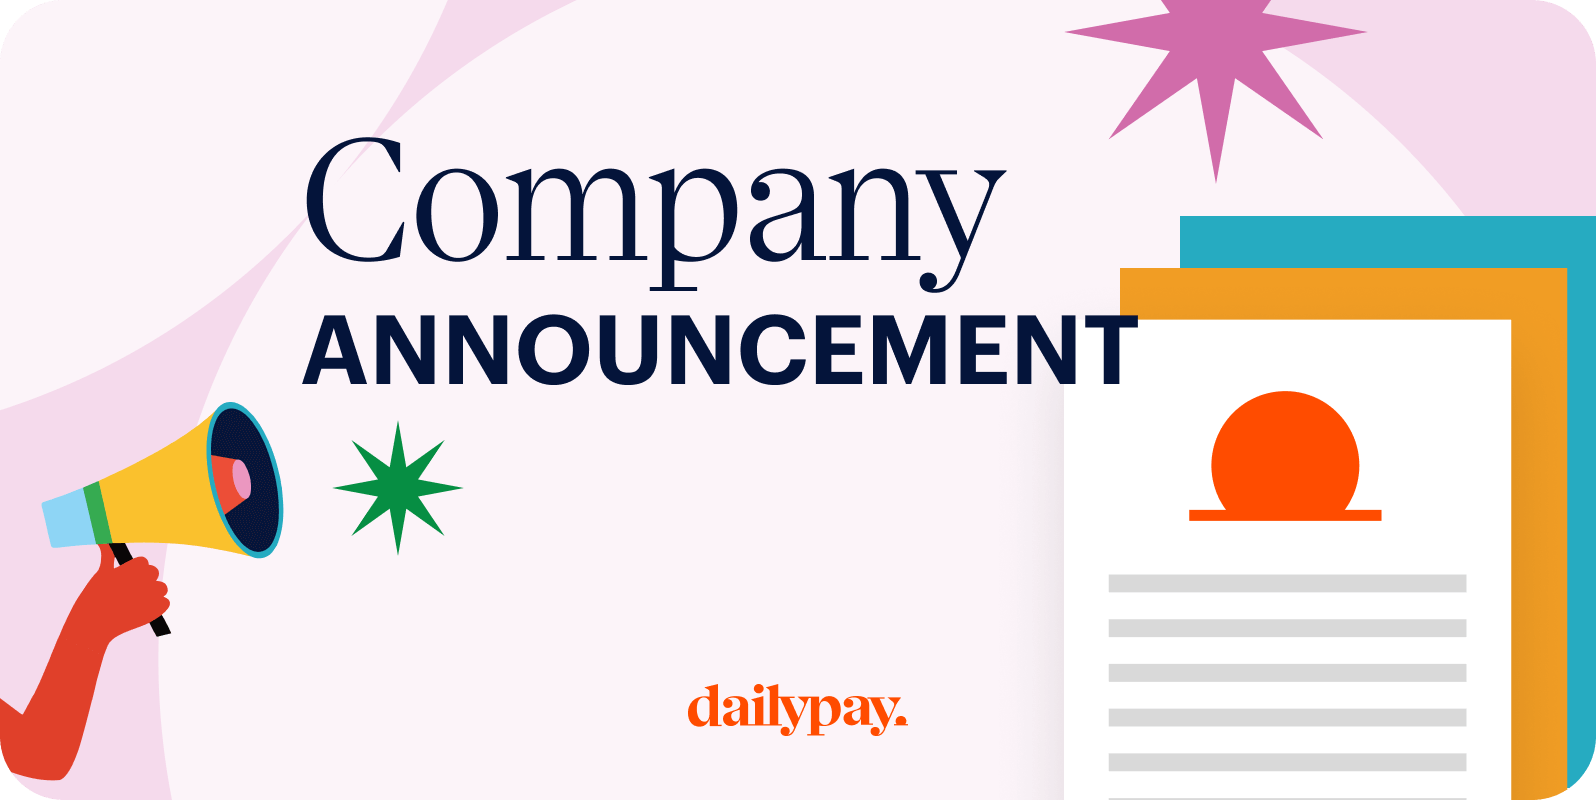 Illustration with a megaphone and documents highlighting a "Company Announcement" by DailyPay.